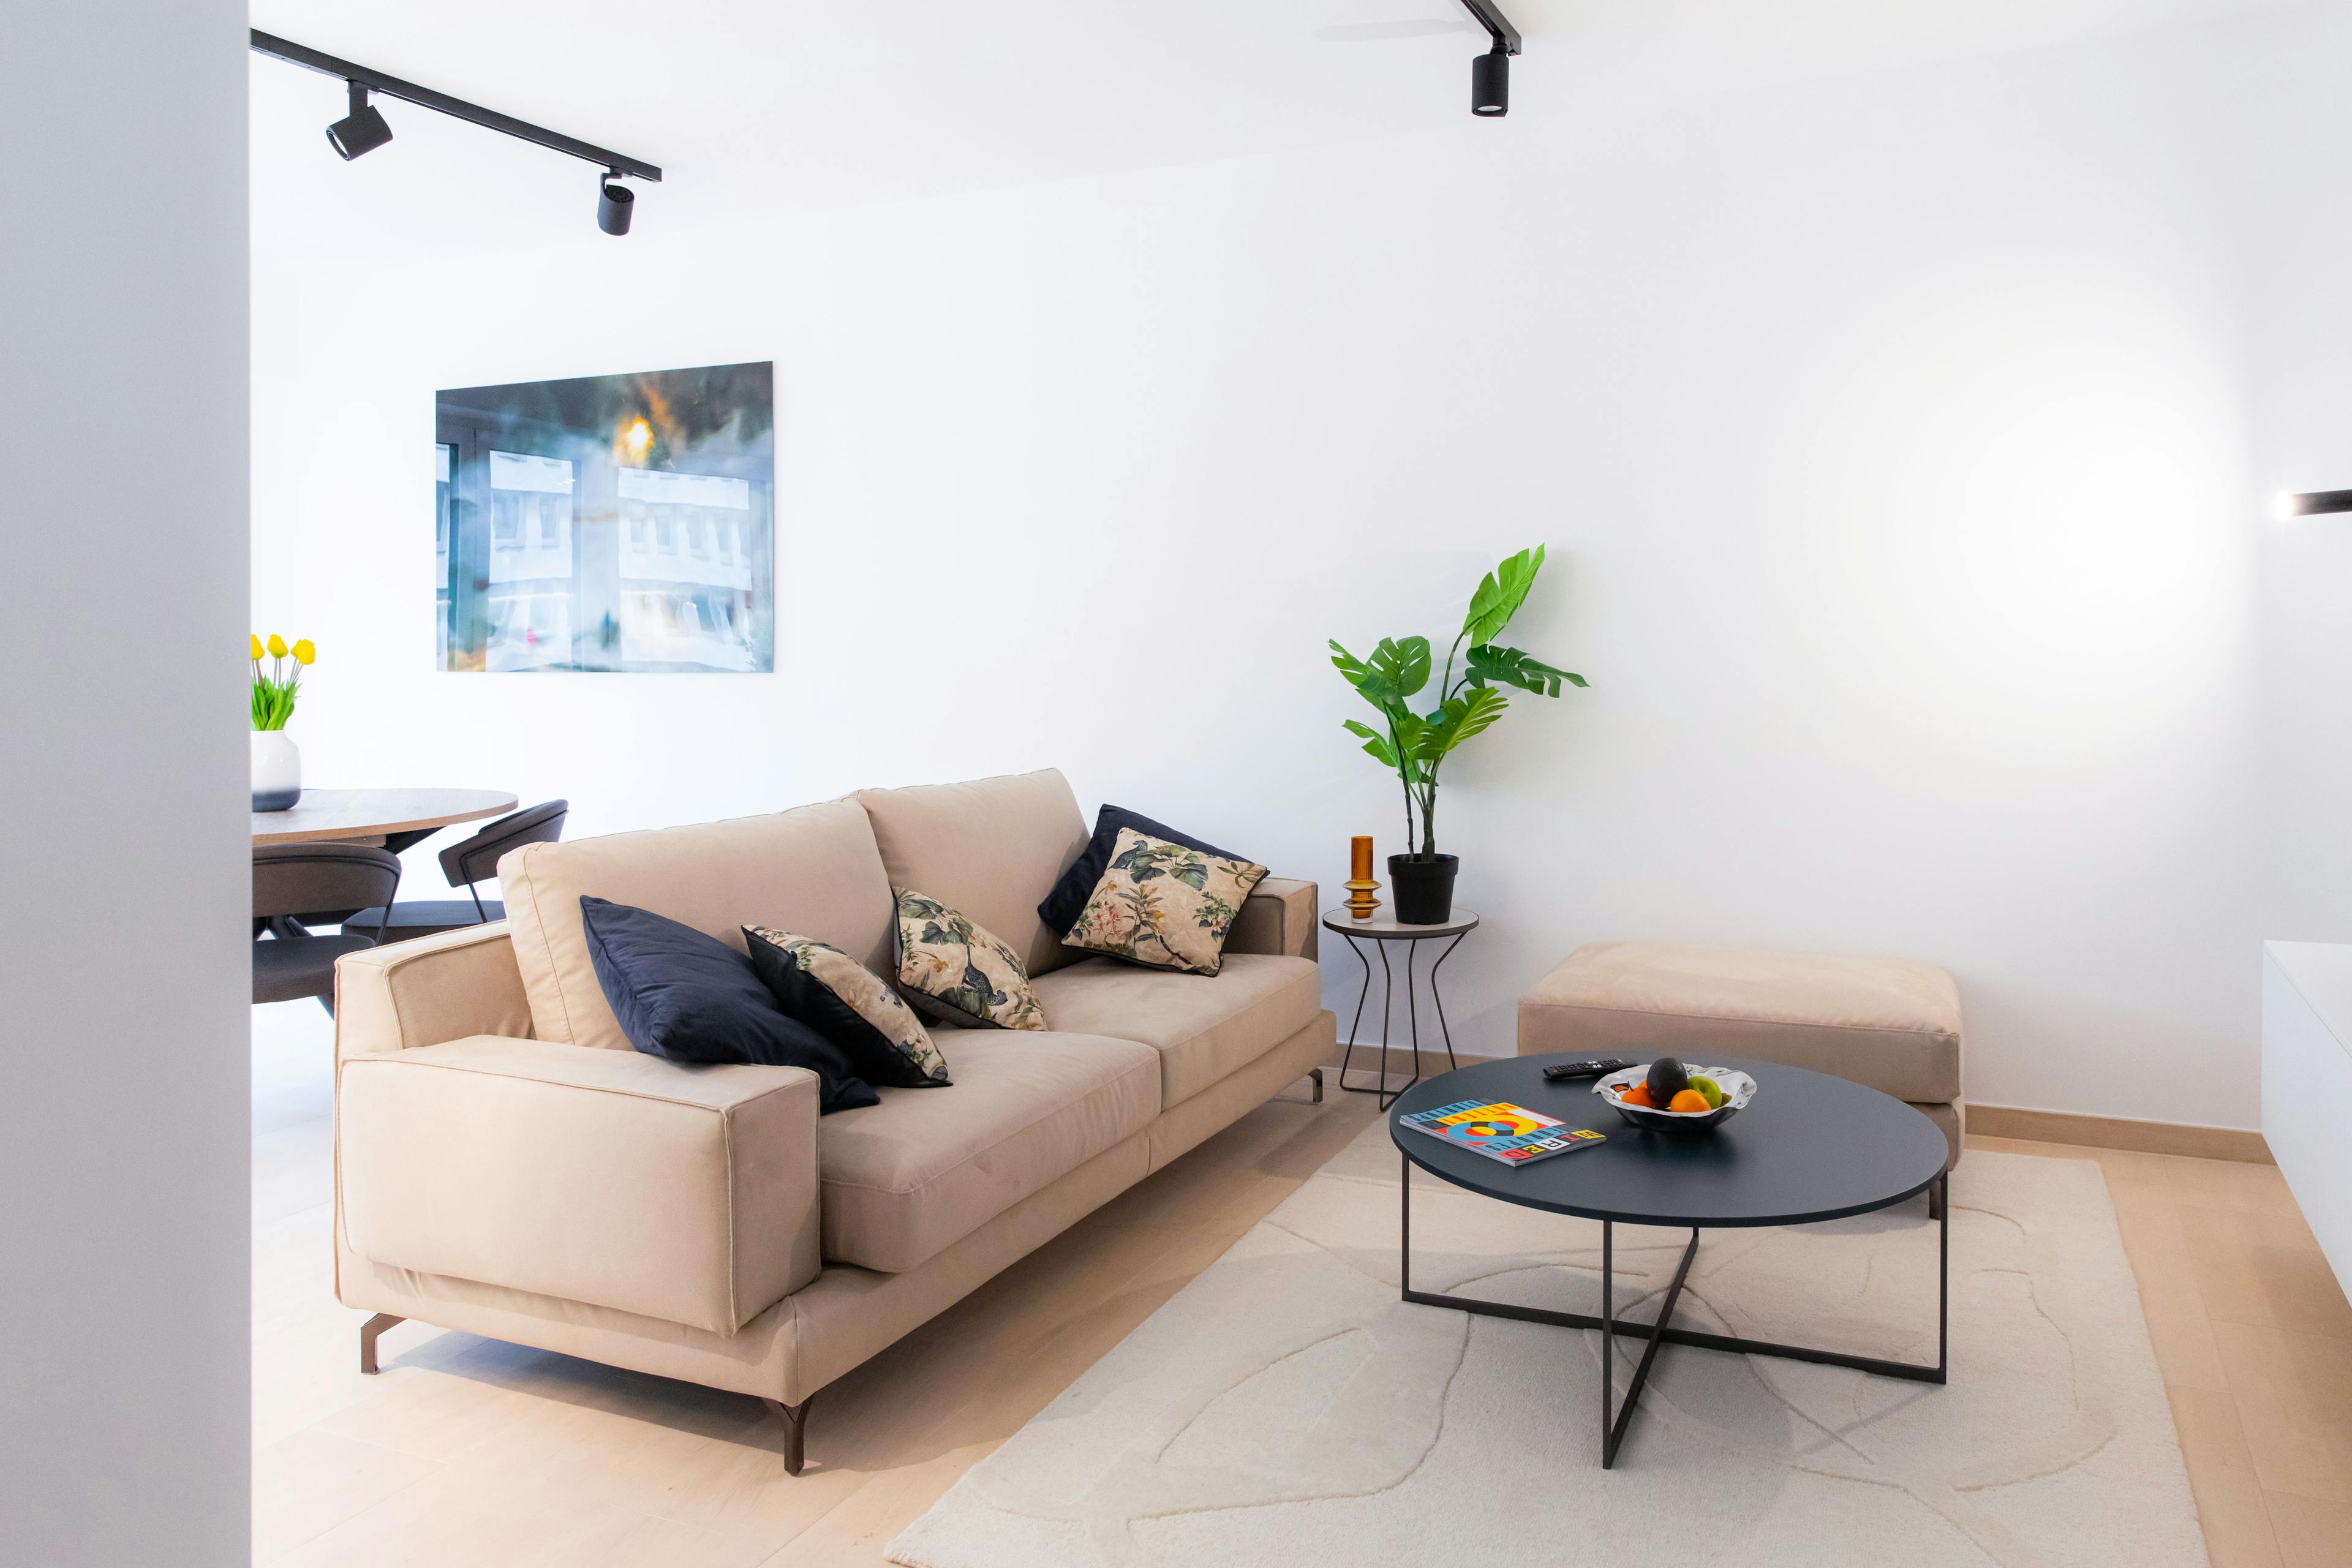 Sofa with cushions on it. In front, there's a coffee table. Behind the couch, is a dining table with chairs, next to big windows. On the ceiling hang industrial-style black lamps, and on the wall hangs a big picture. Next to the sofa, there's a small flower in a pot.